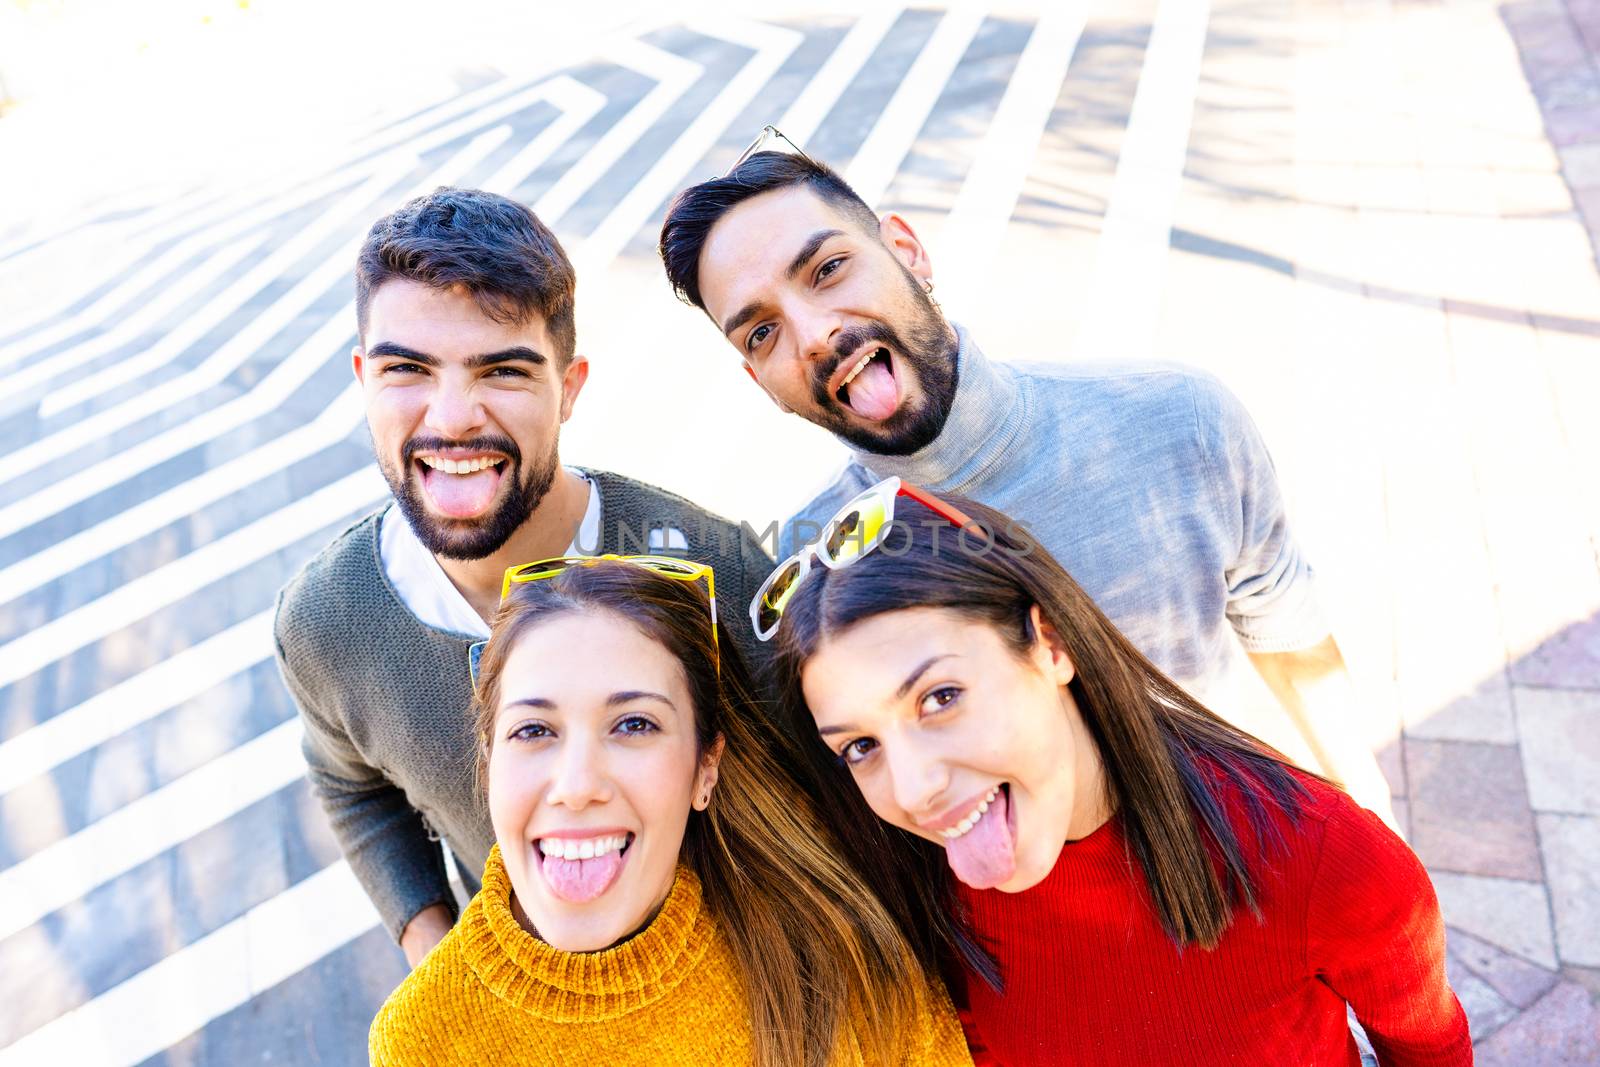 Two Caucasian couple looking at the camera from the bottom smiling and making mouths open faces sticking out their tongues - Friends having fun outdoor doing selfie with camera on top - Focus on men